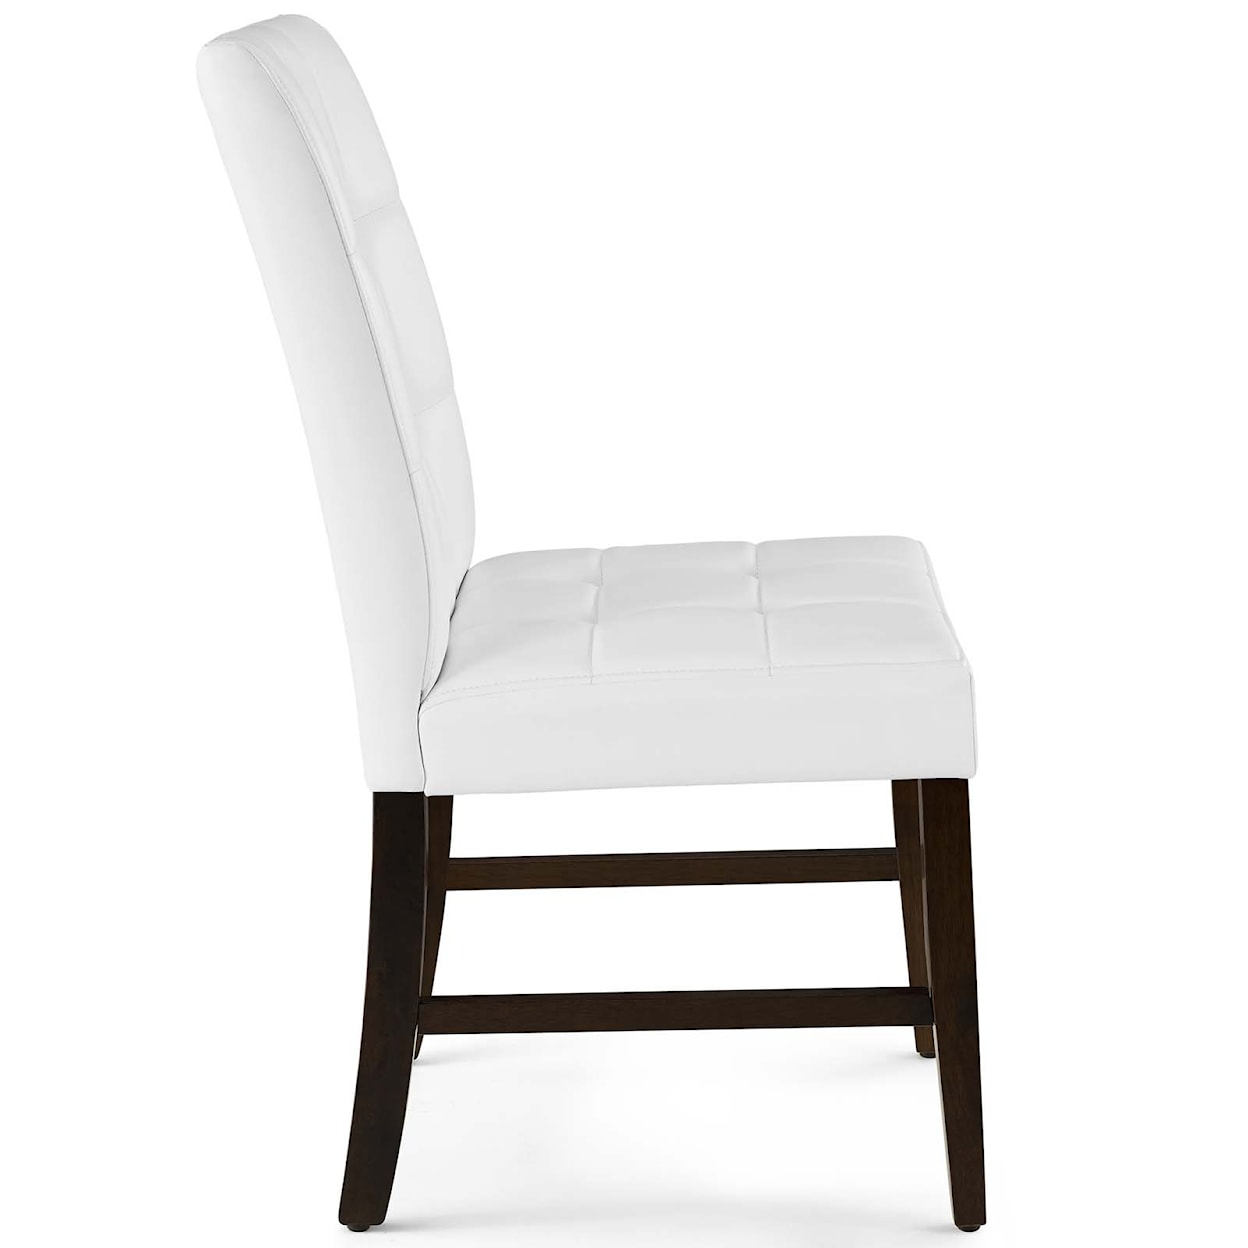 Modway Promulgate Dining Side Chair